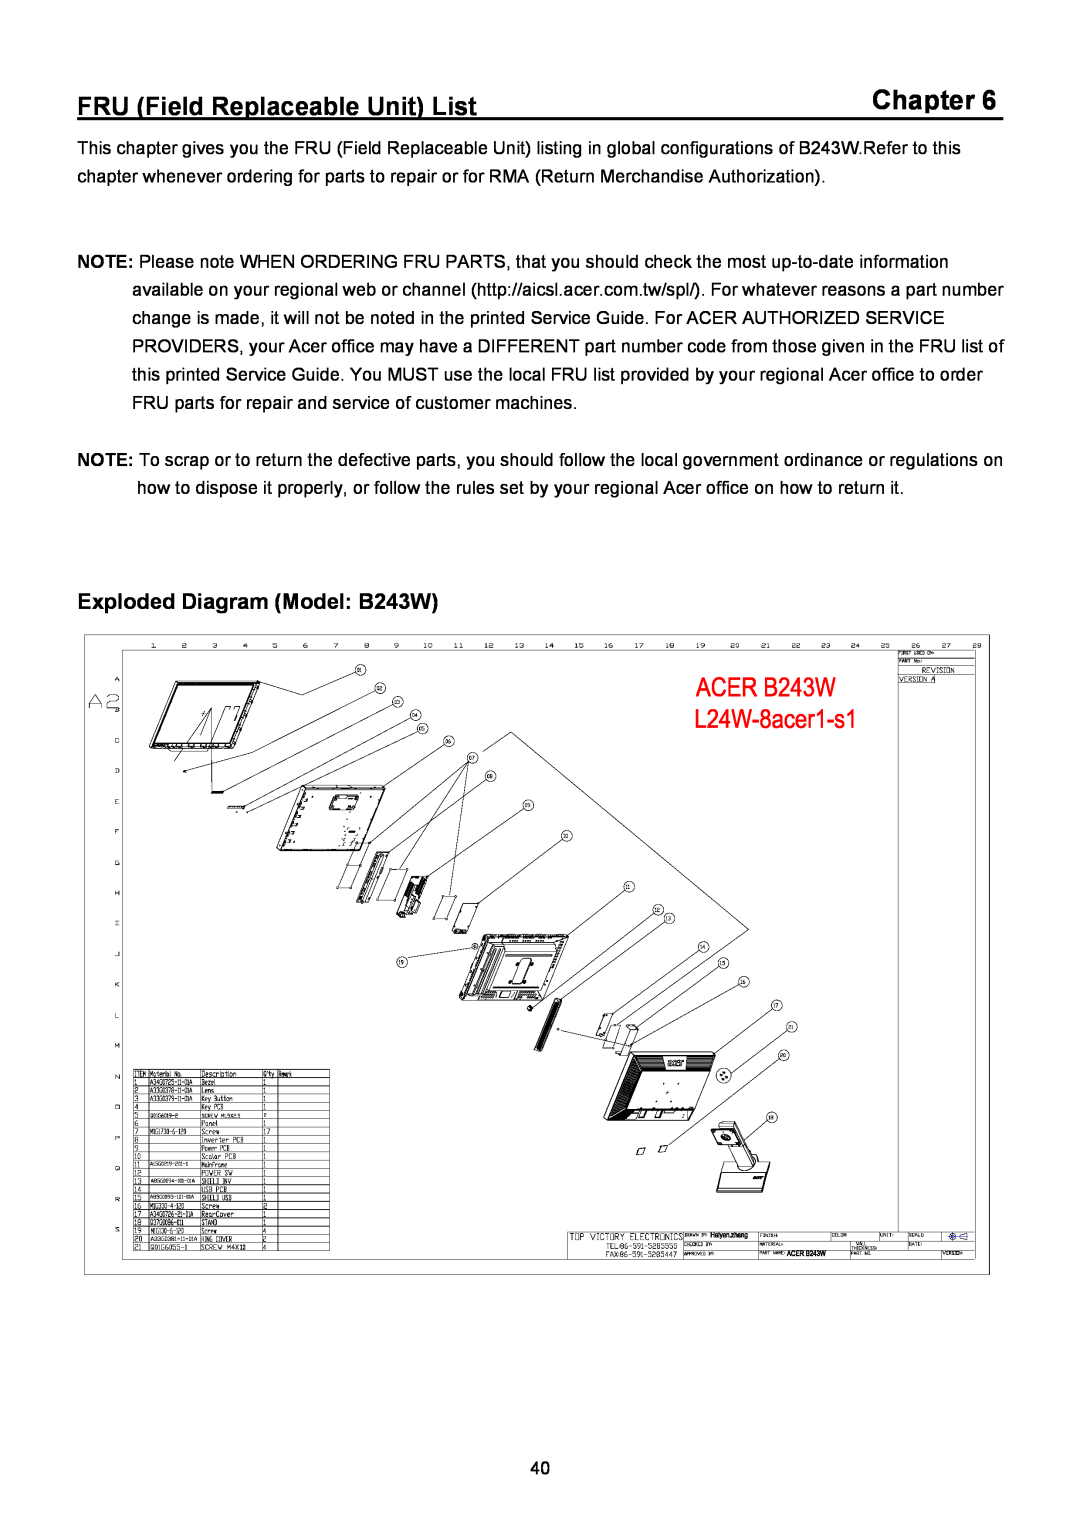 Acer manual Chapter, FRU Field Replaceable Unit List, Exploded Diagram Model B243W 